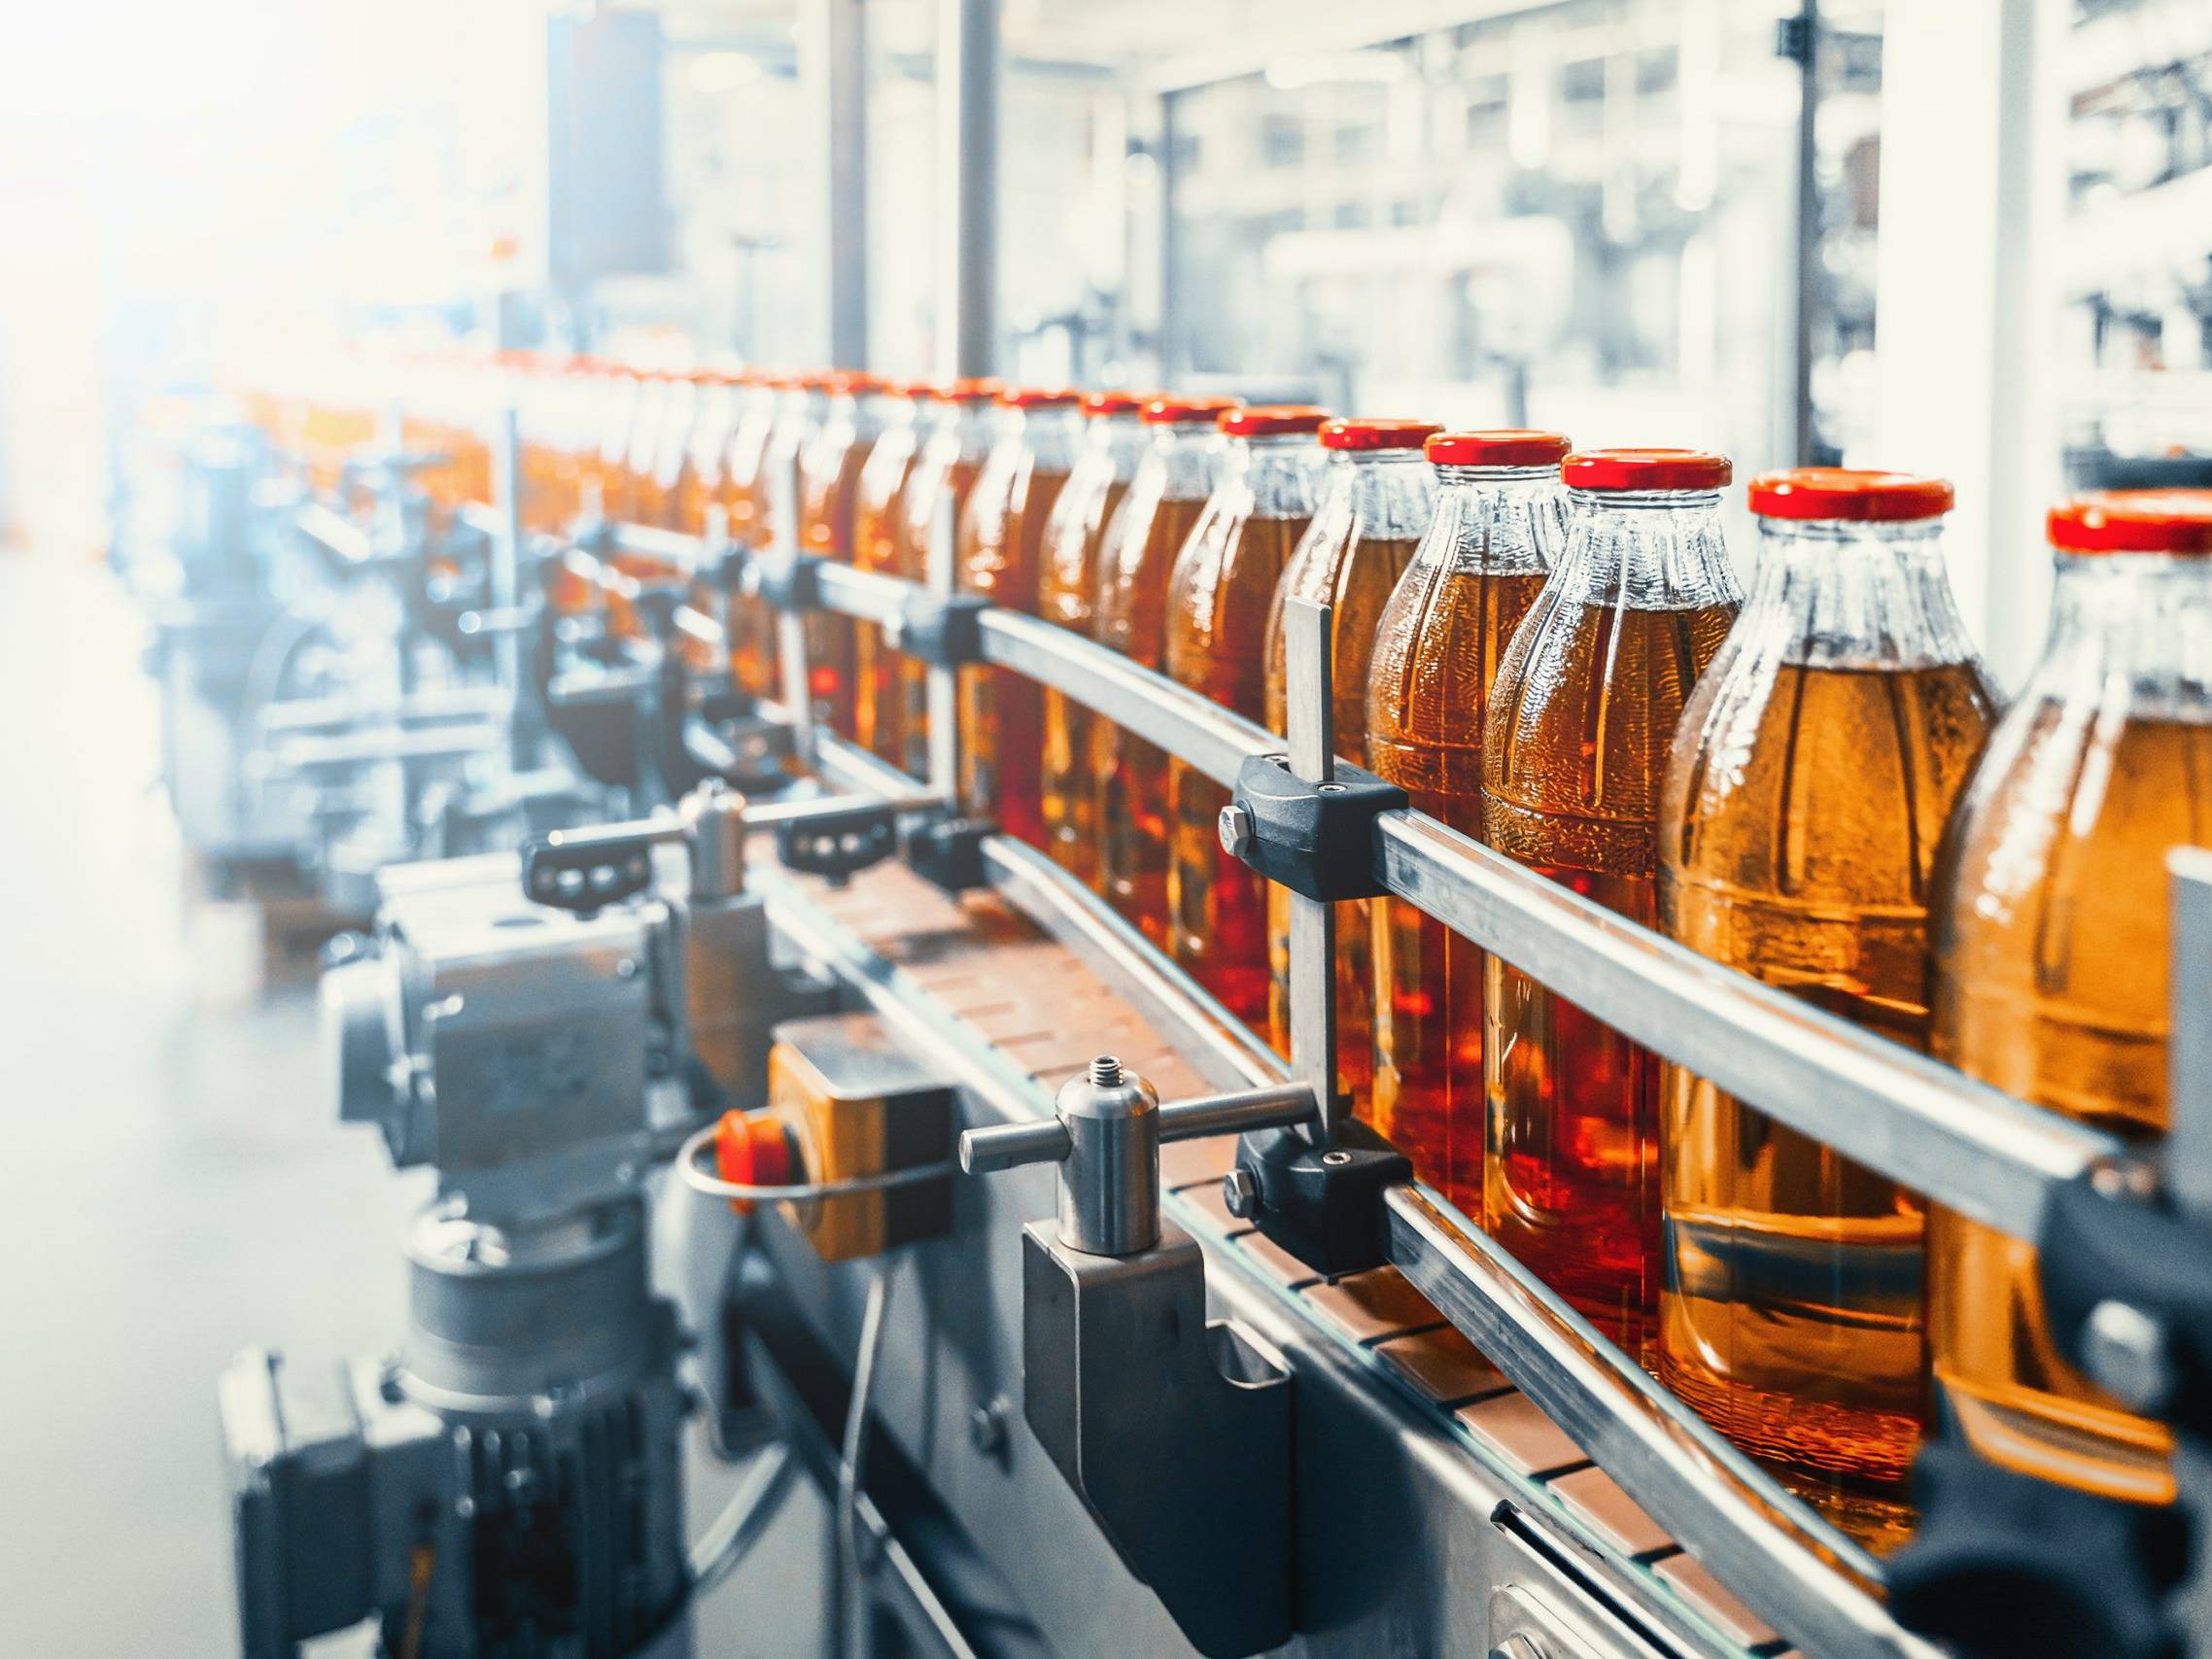 juice in glass bottles on beverage plant or factory interior, industrial manufacturing production line